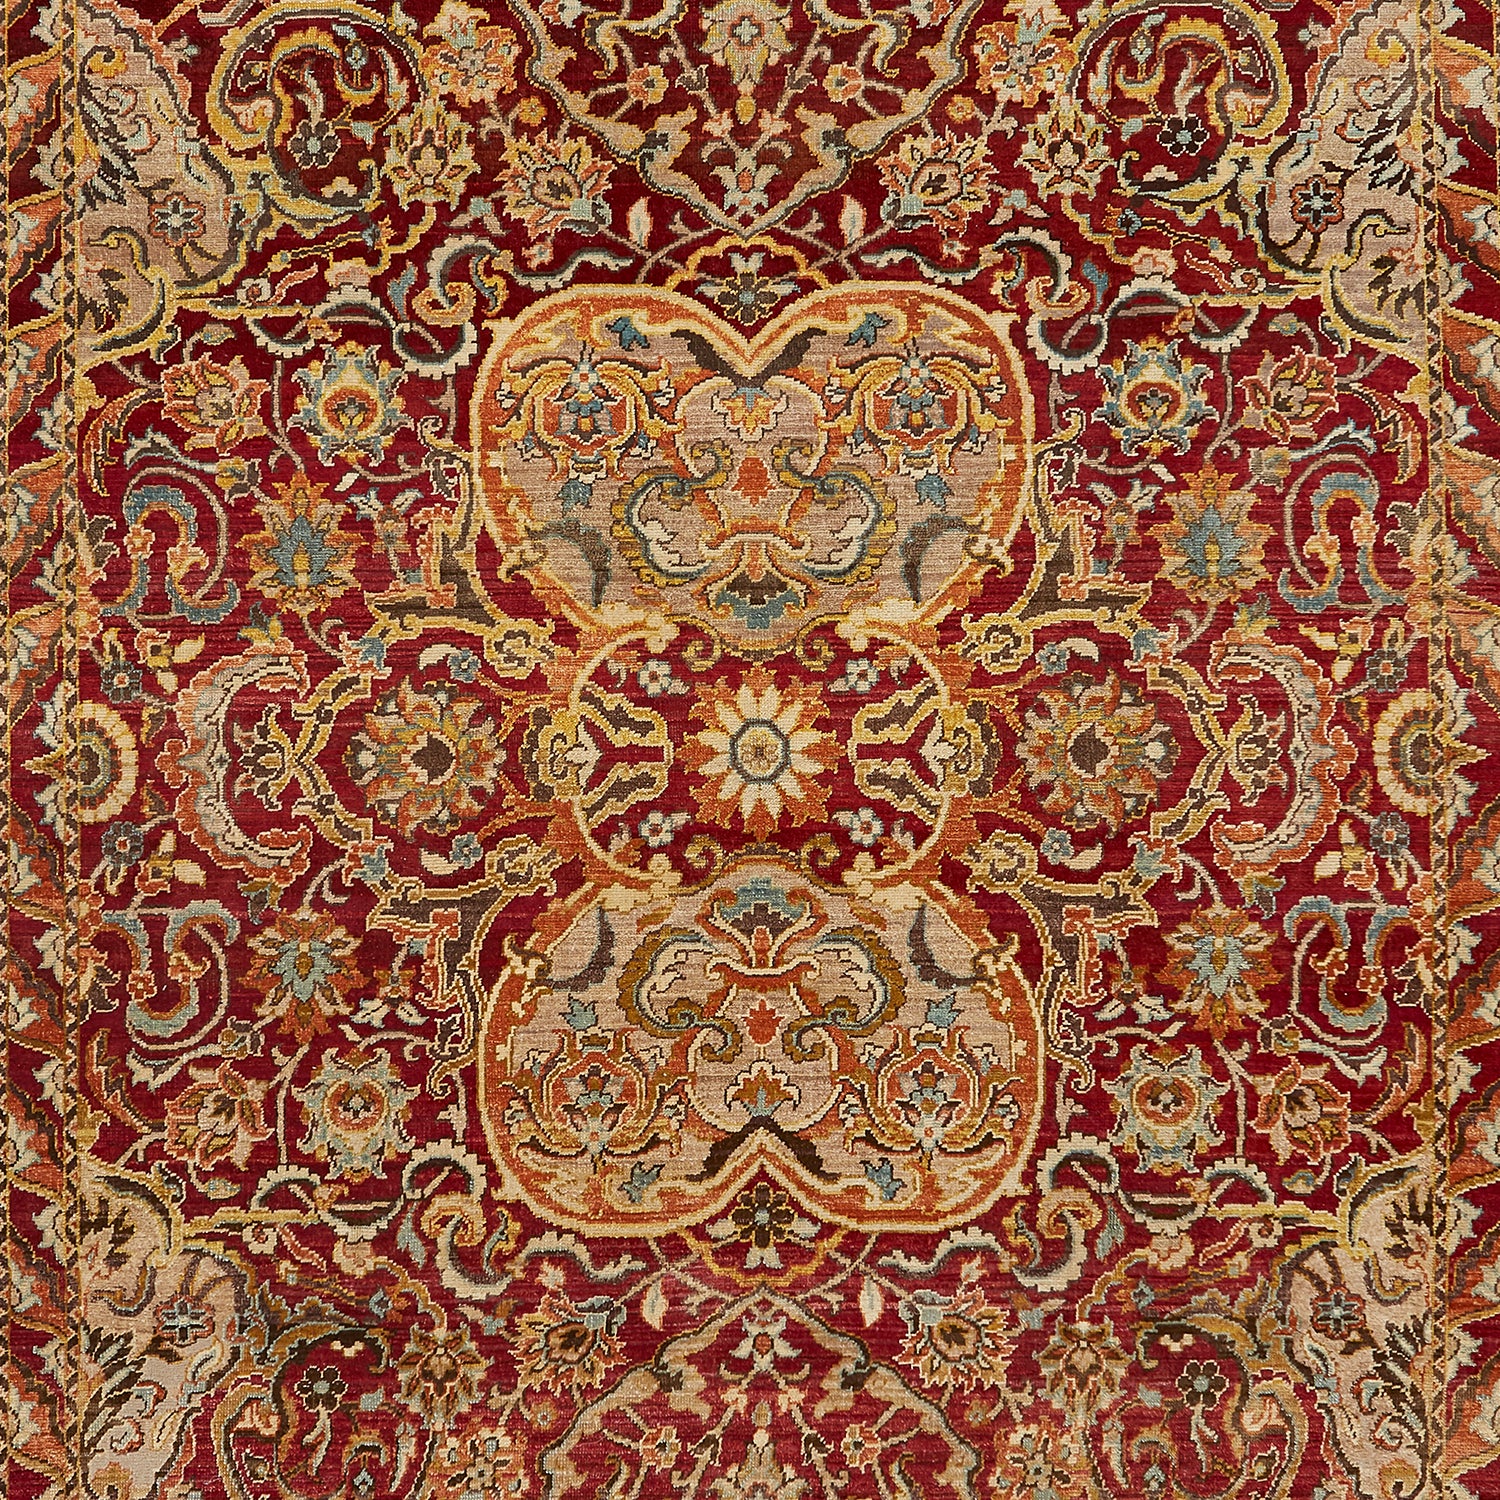 Exquisite Persian-inspired rug showcases intricate floral and geometric patterns.